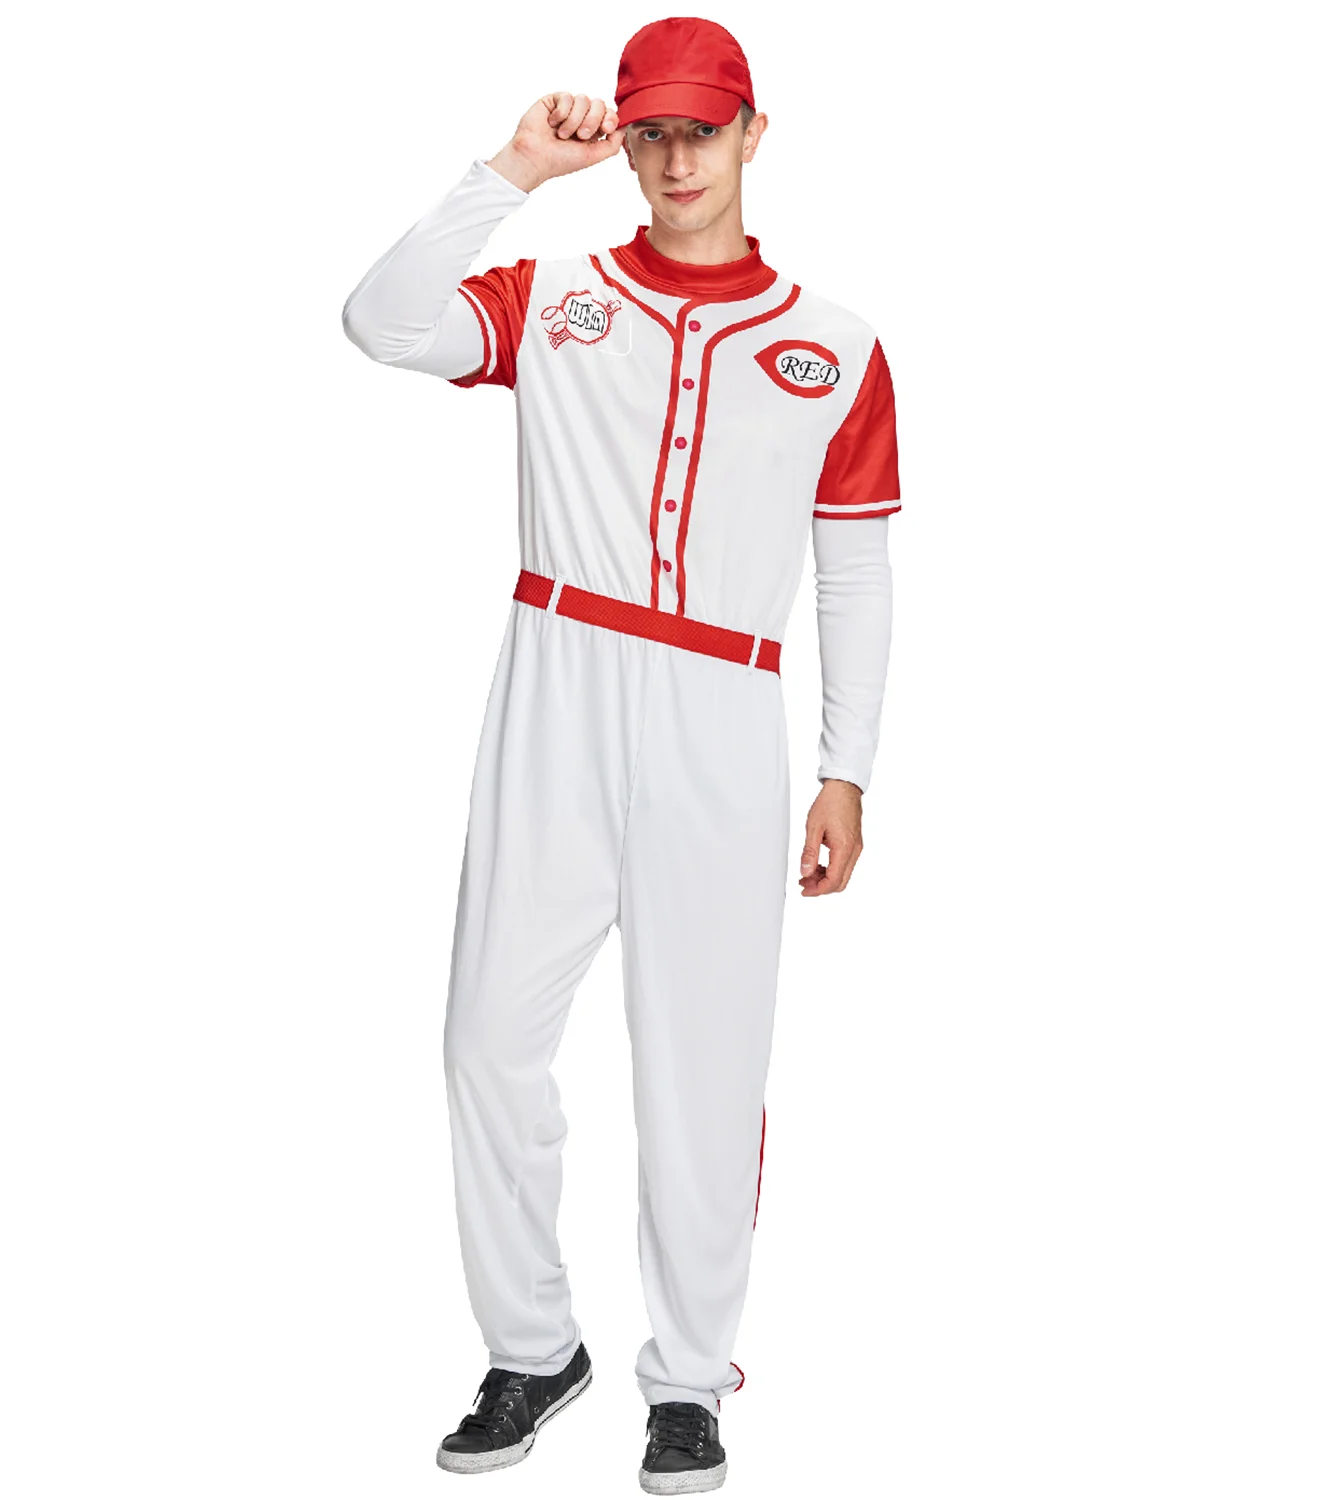 Men Halloween Baseball Player Costume A League Of Their Own Jumpsuit Hat  Outfit With Sleeves For Adults Party Red White M - Buy Men Halloween  Baseball